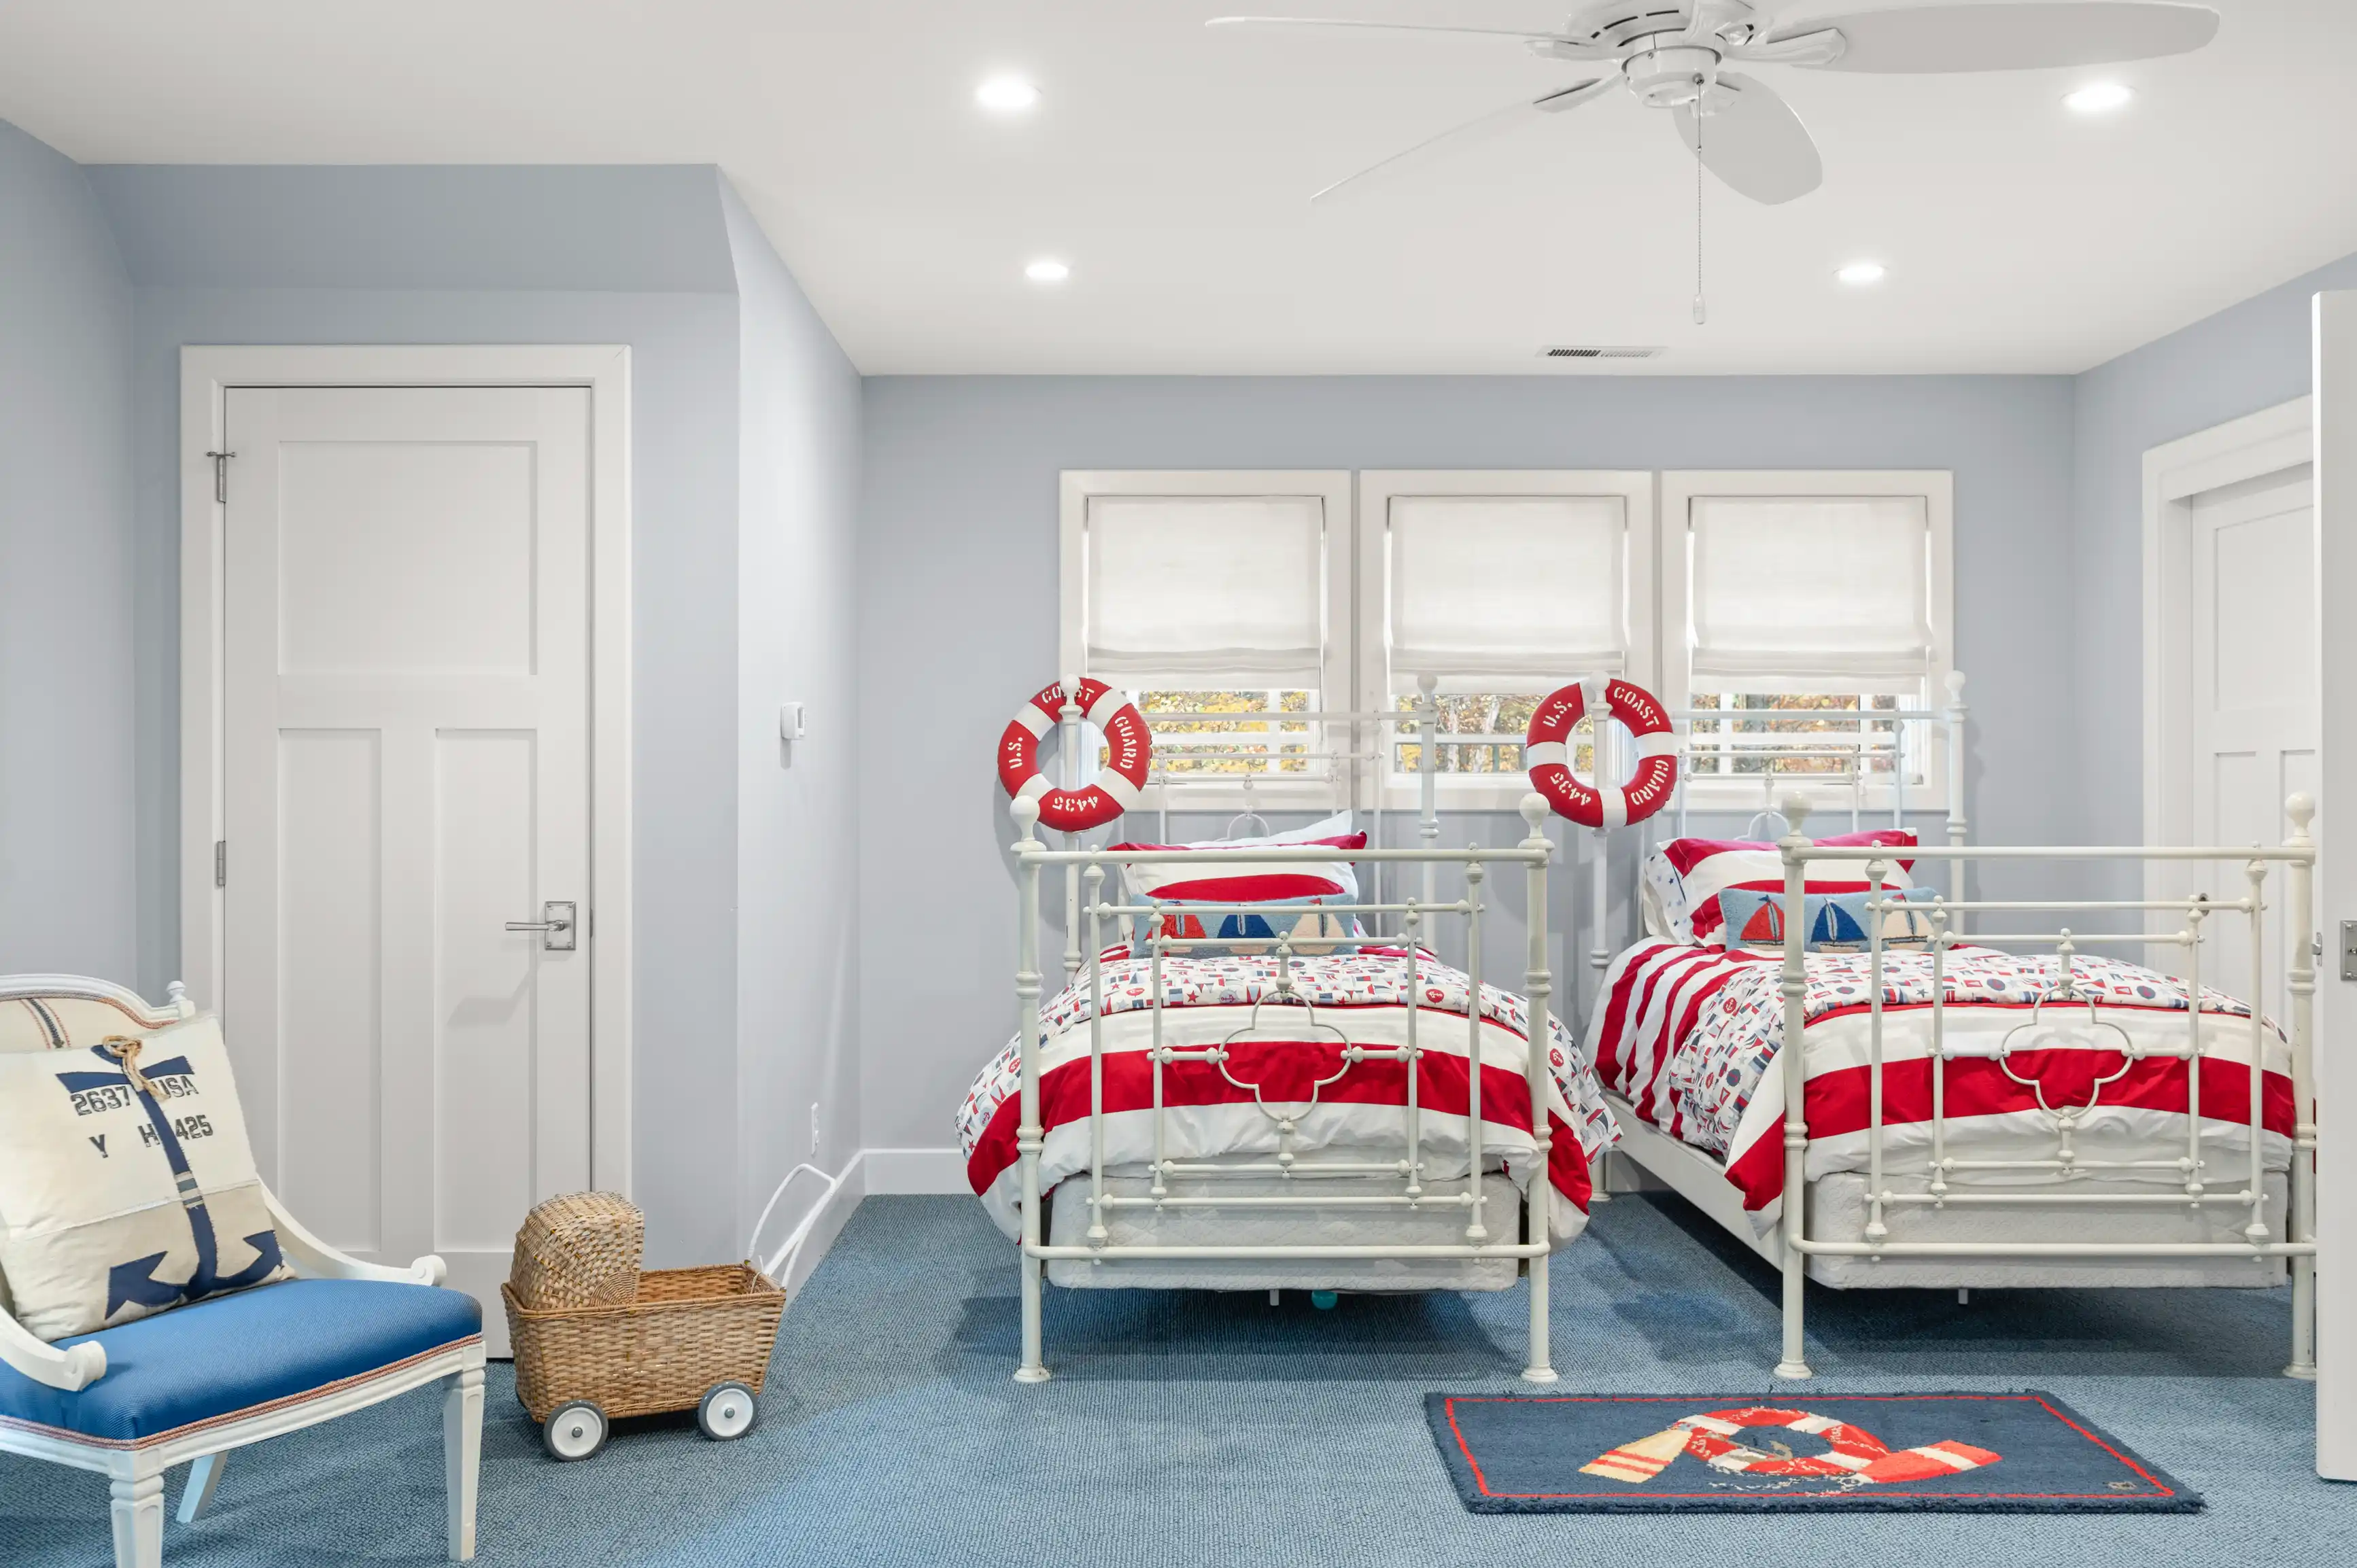 A bright, nautical-themed children's bedroom with two twin beds, life preserver wall decorations, a blue carpet, and a ceiling fan.